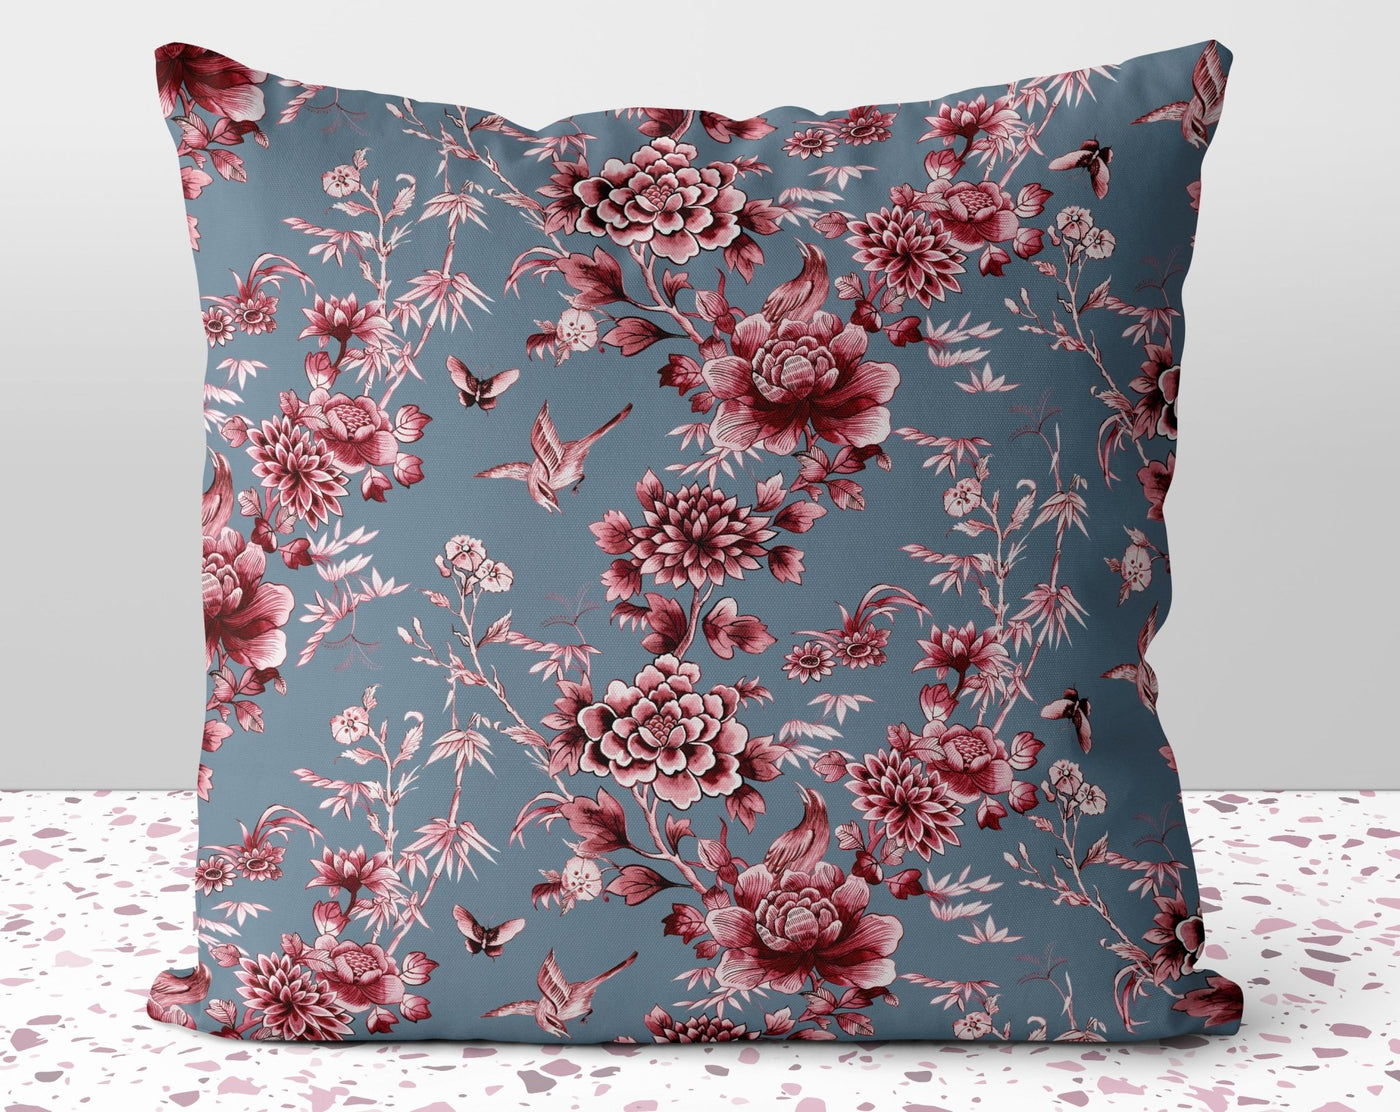 Floral Chinoiserie Red Flowers on Gray Pillow Throw Cover with Insert - Cush Potato Pillows